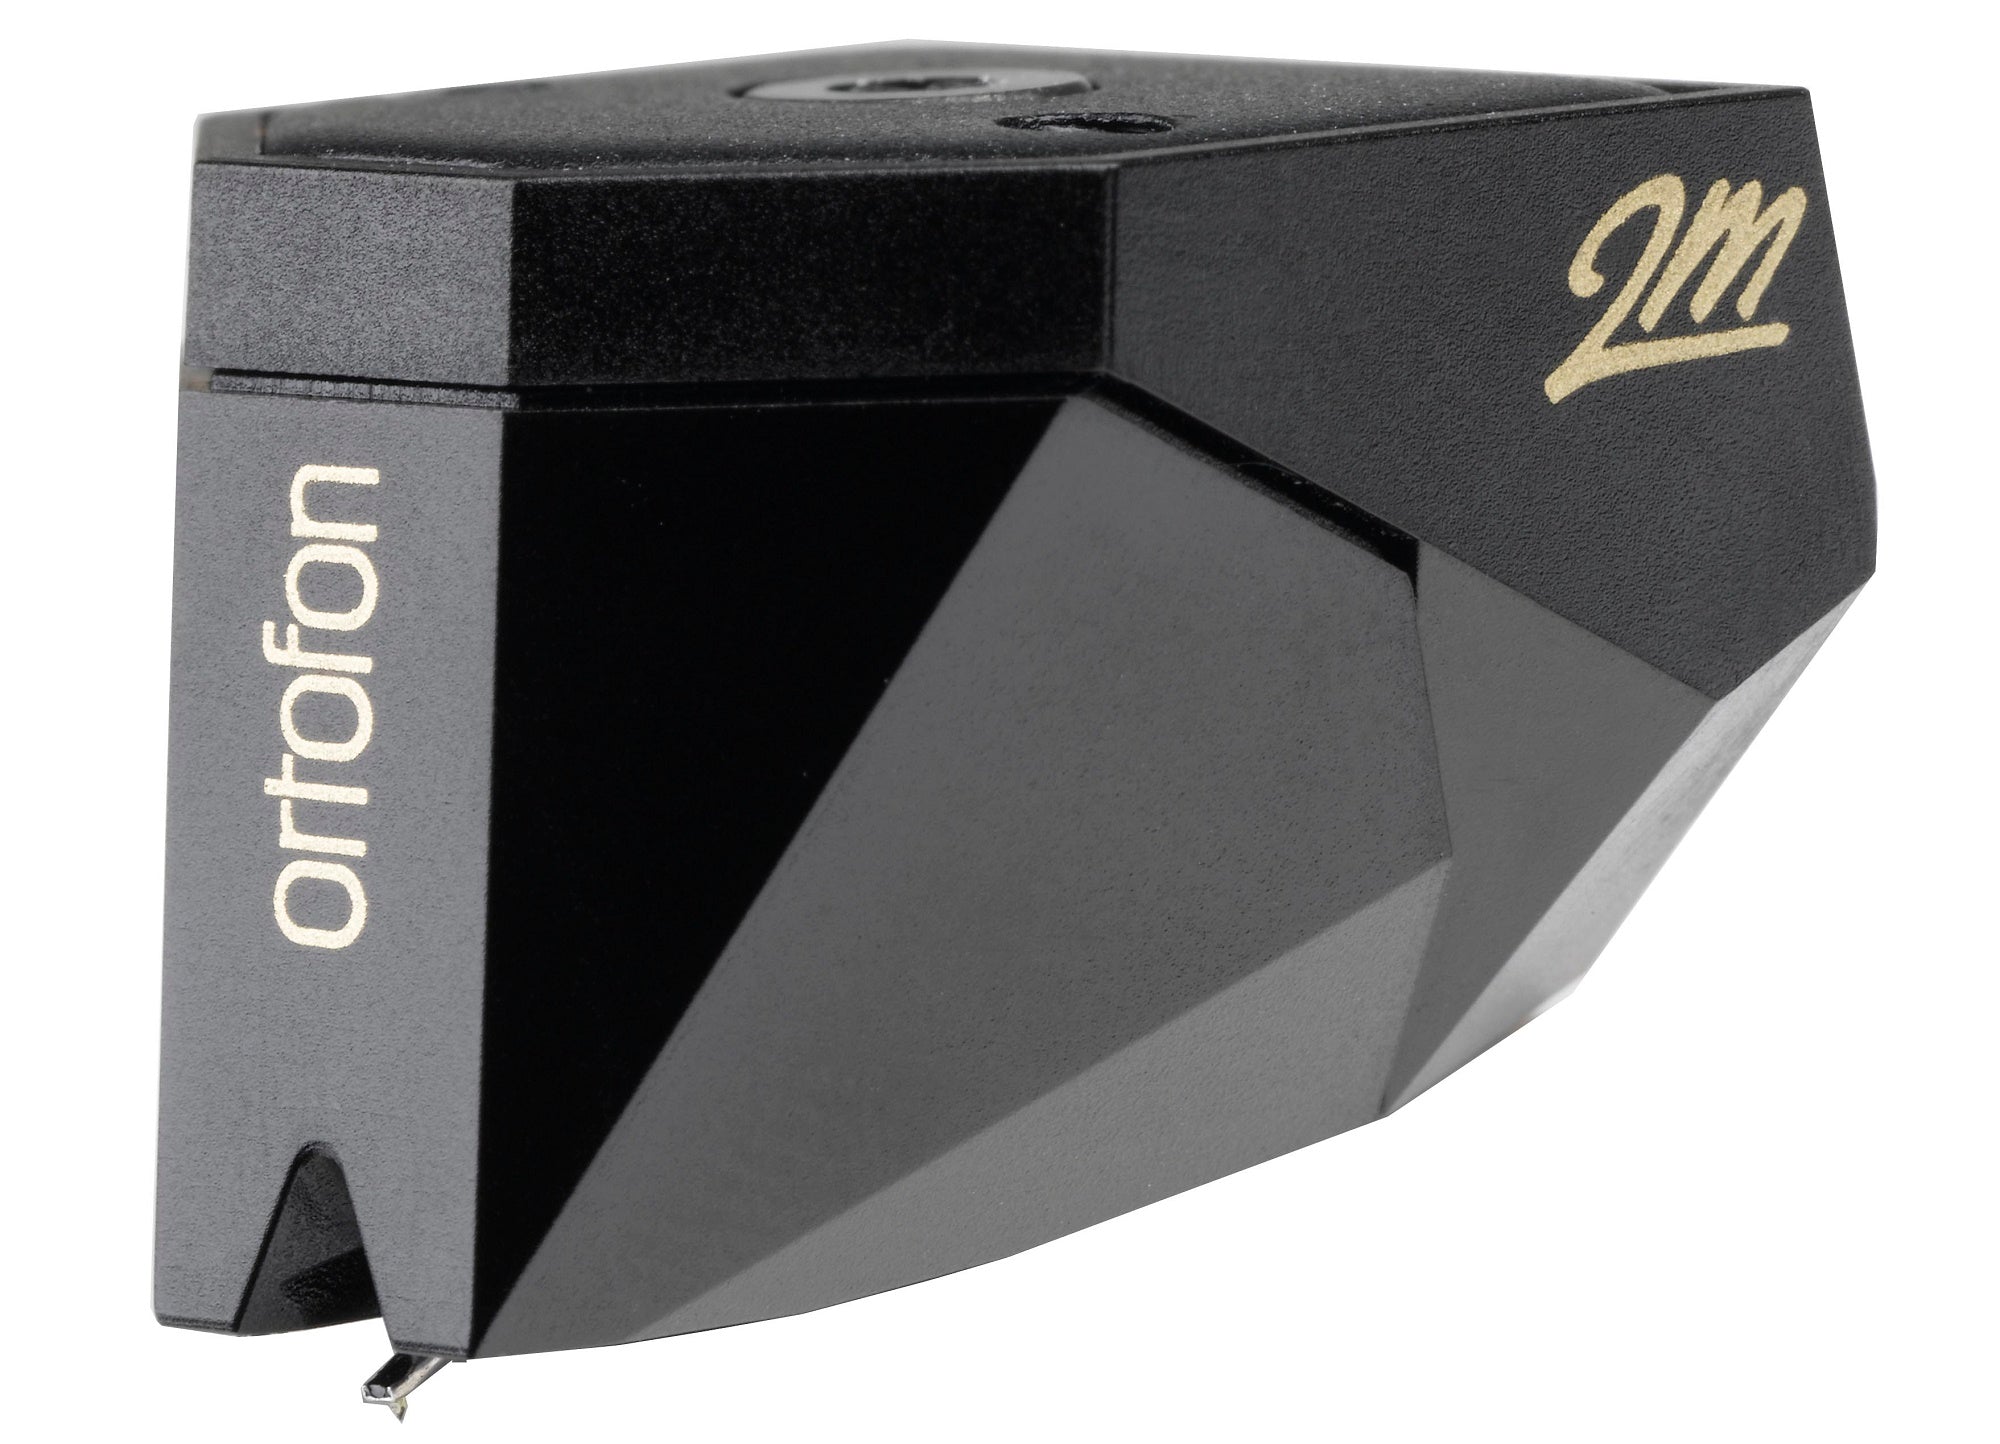 Ortofon Turntable Cartridges (call for inventory)